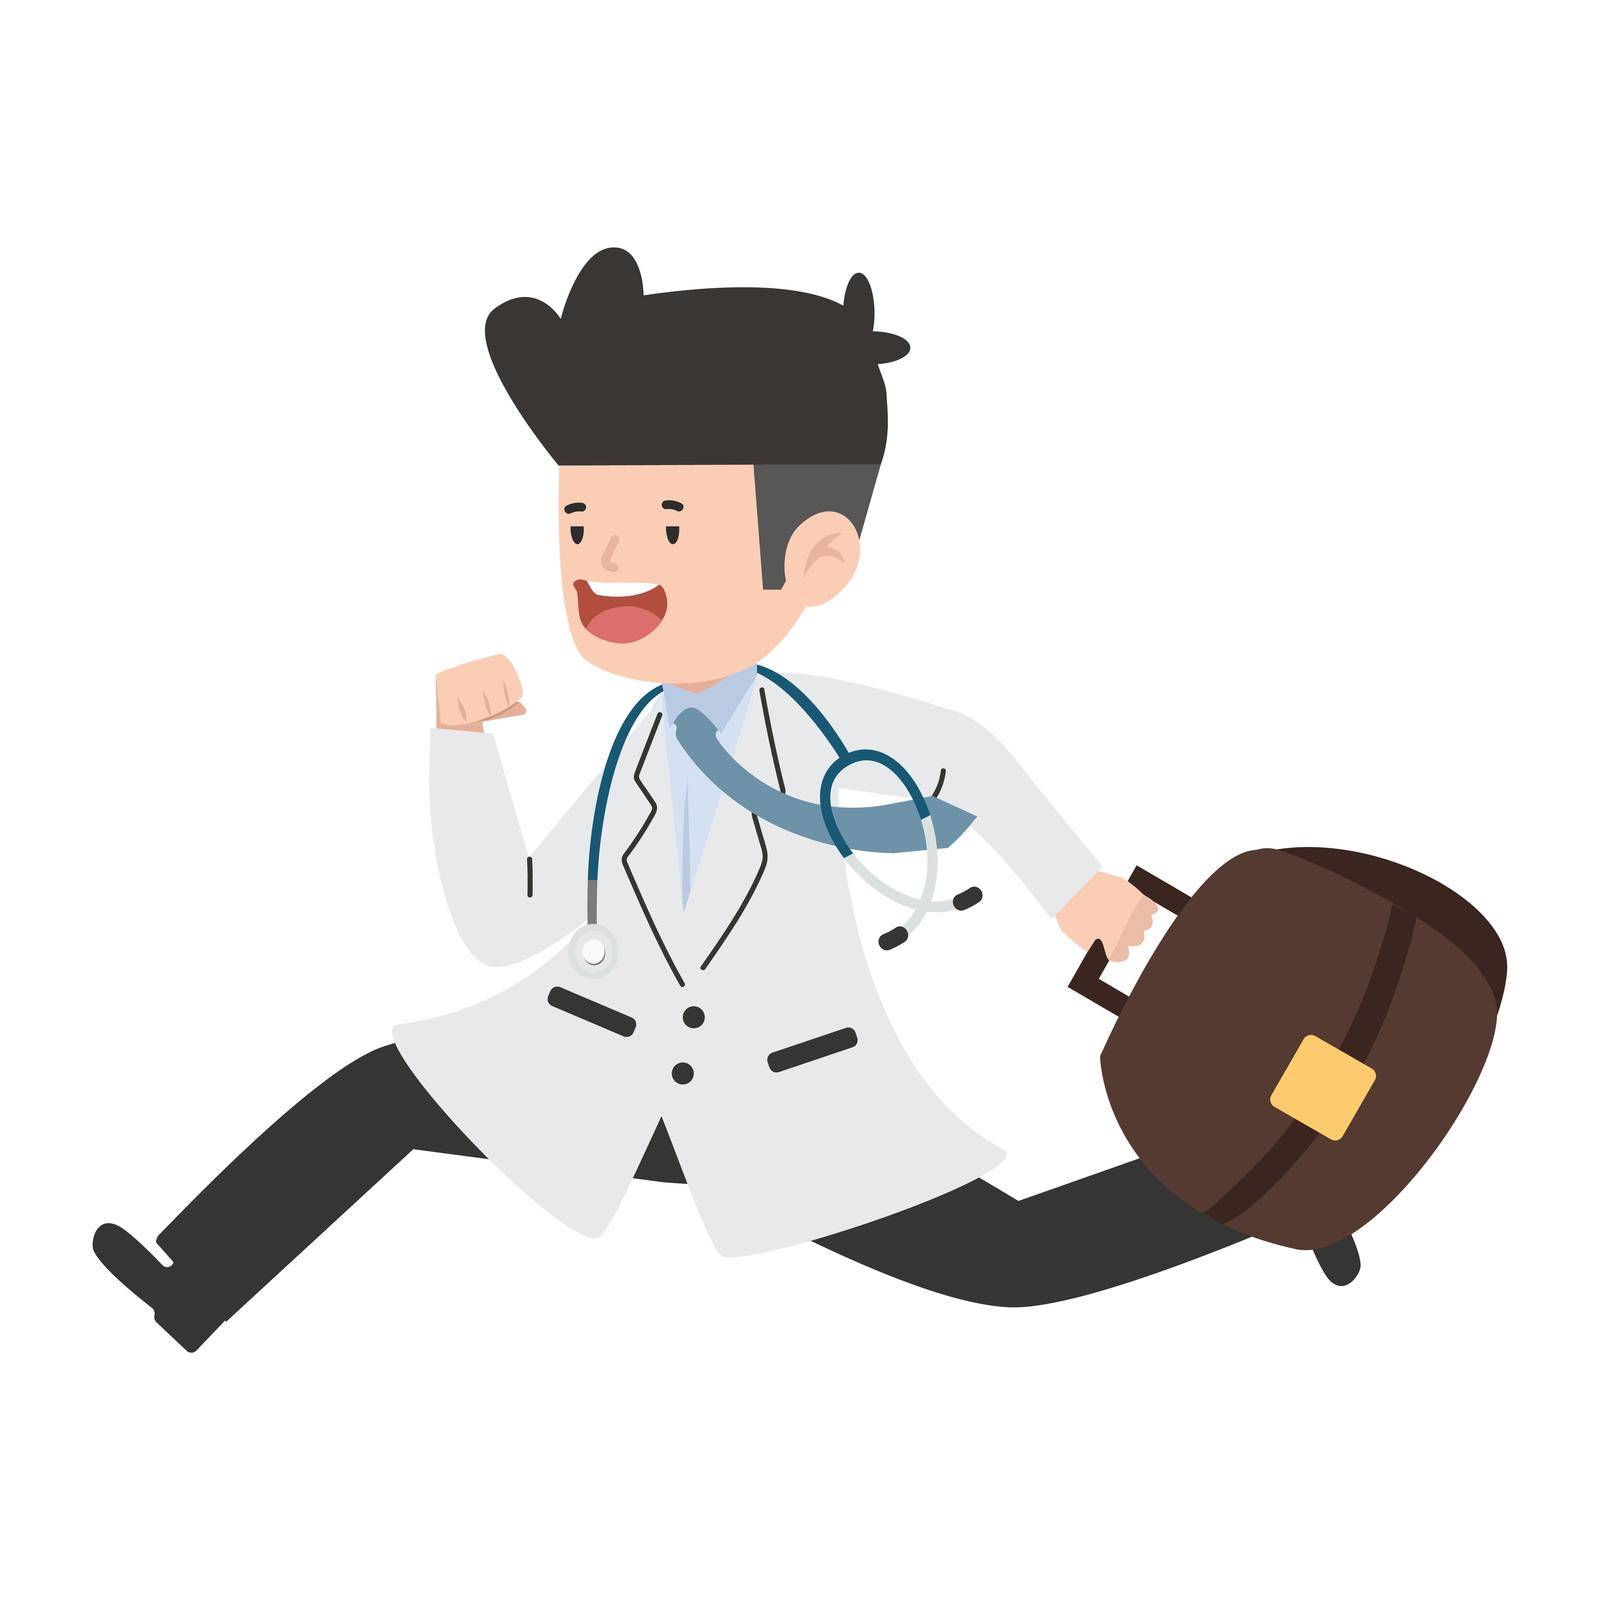 Doctor emergency hurrying to help the patient cartoon